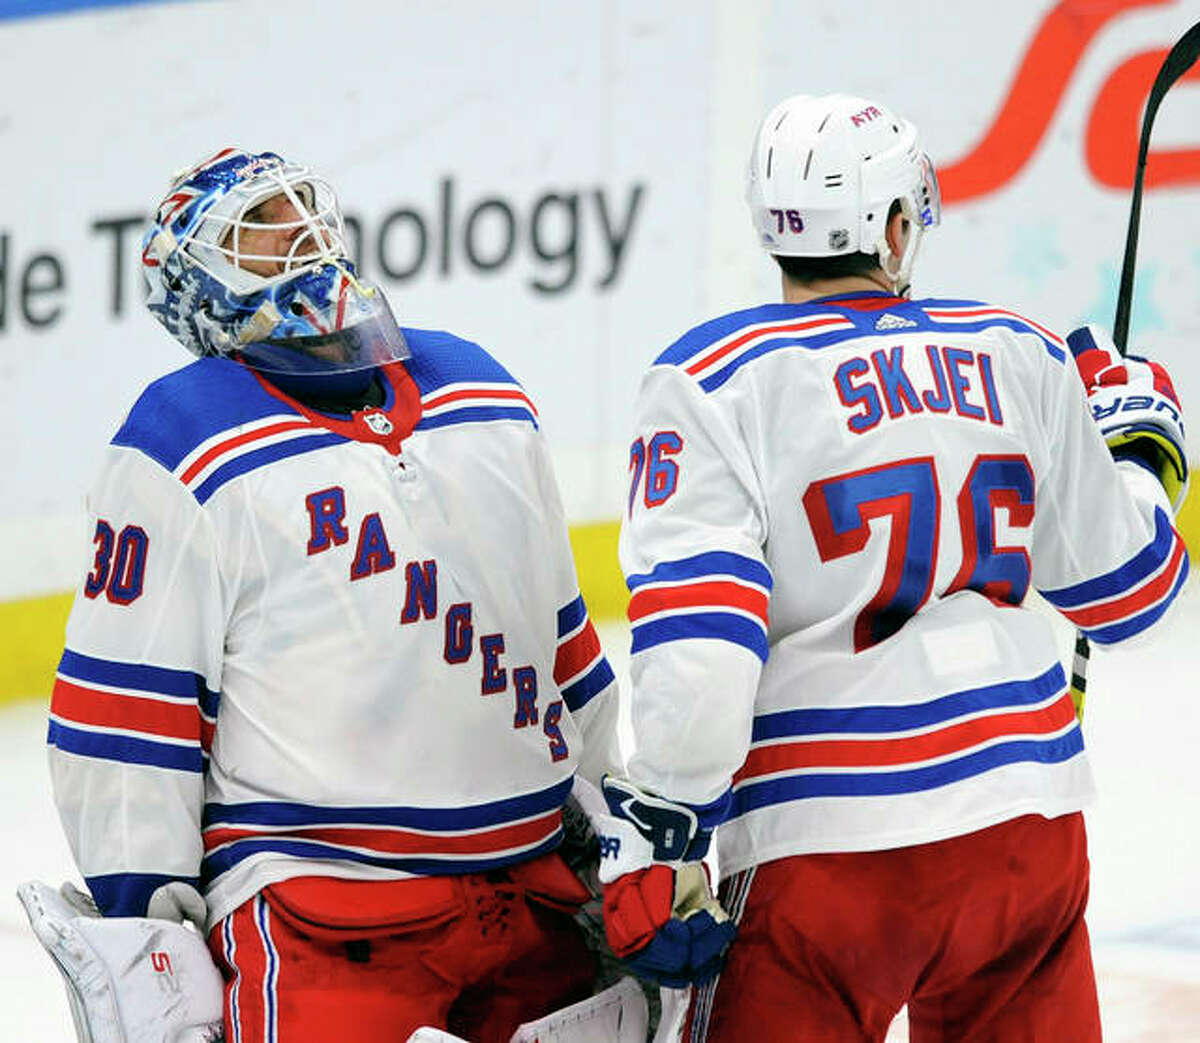 New York Rangers goalie Henrik Lundqvist (30), of Sweden, celebrates with Brady Skjei (76) after their 2-1 victory over the Blues Monday night in St. Louis.